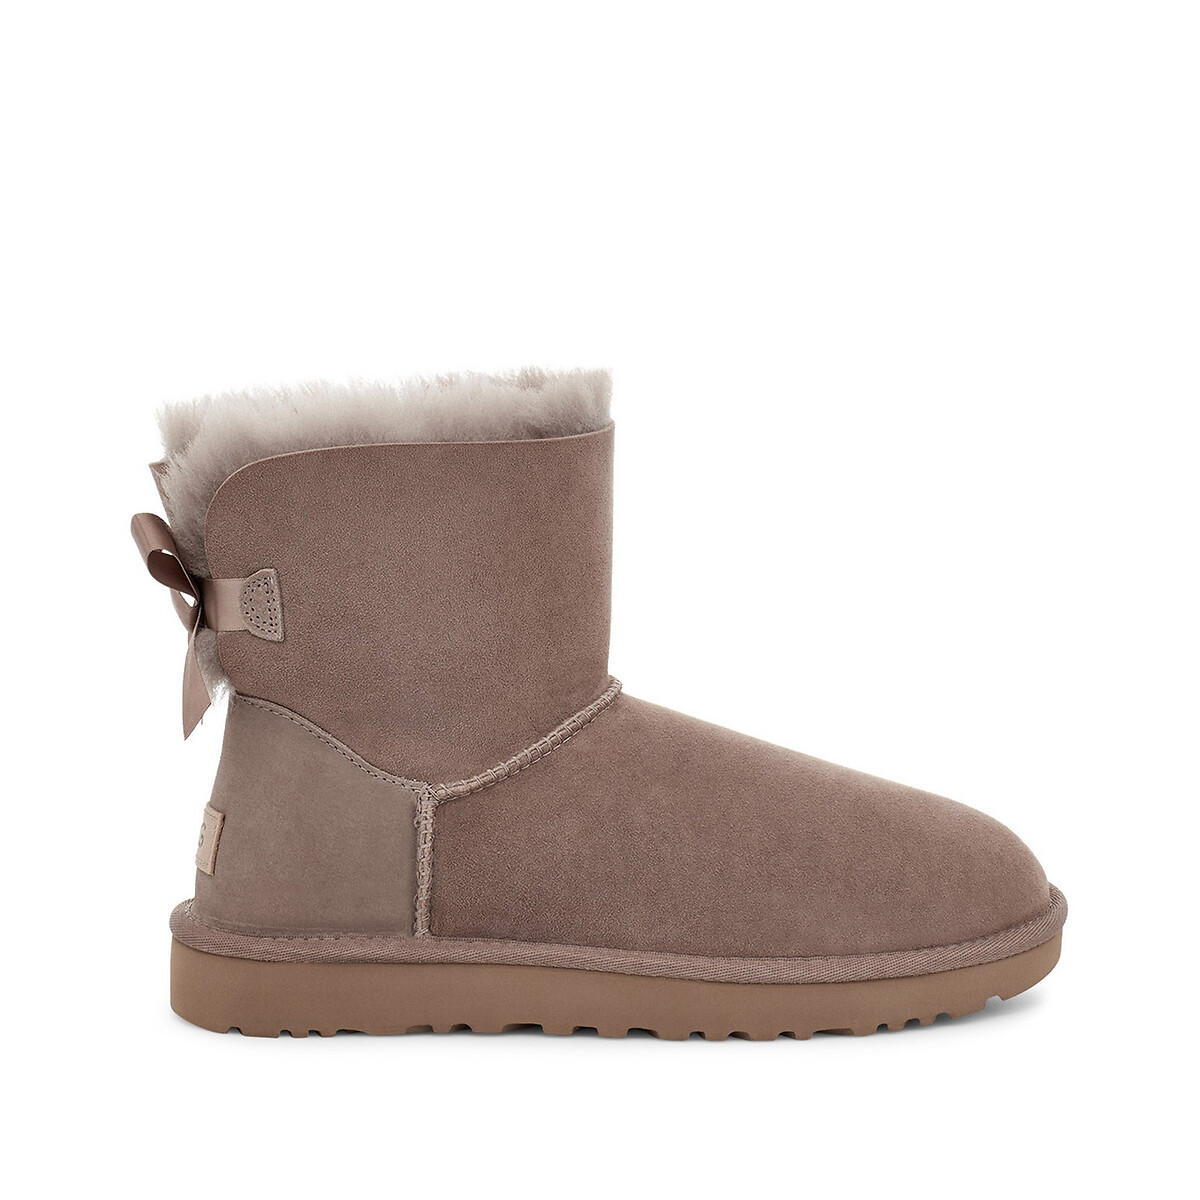 what type of fur is in uggs